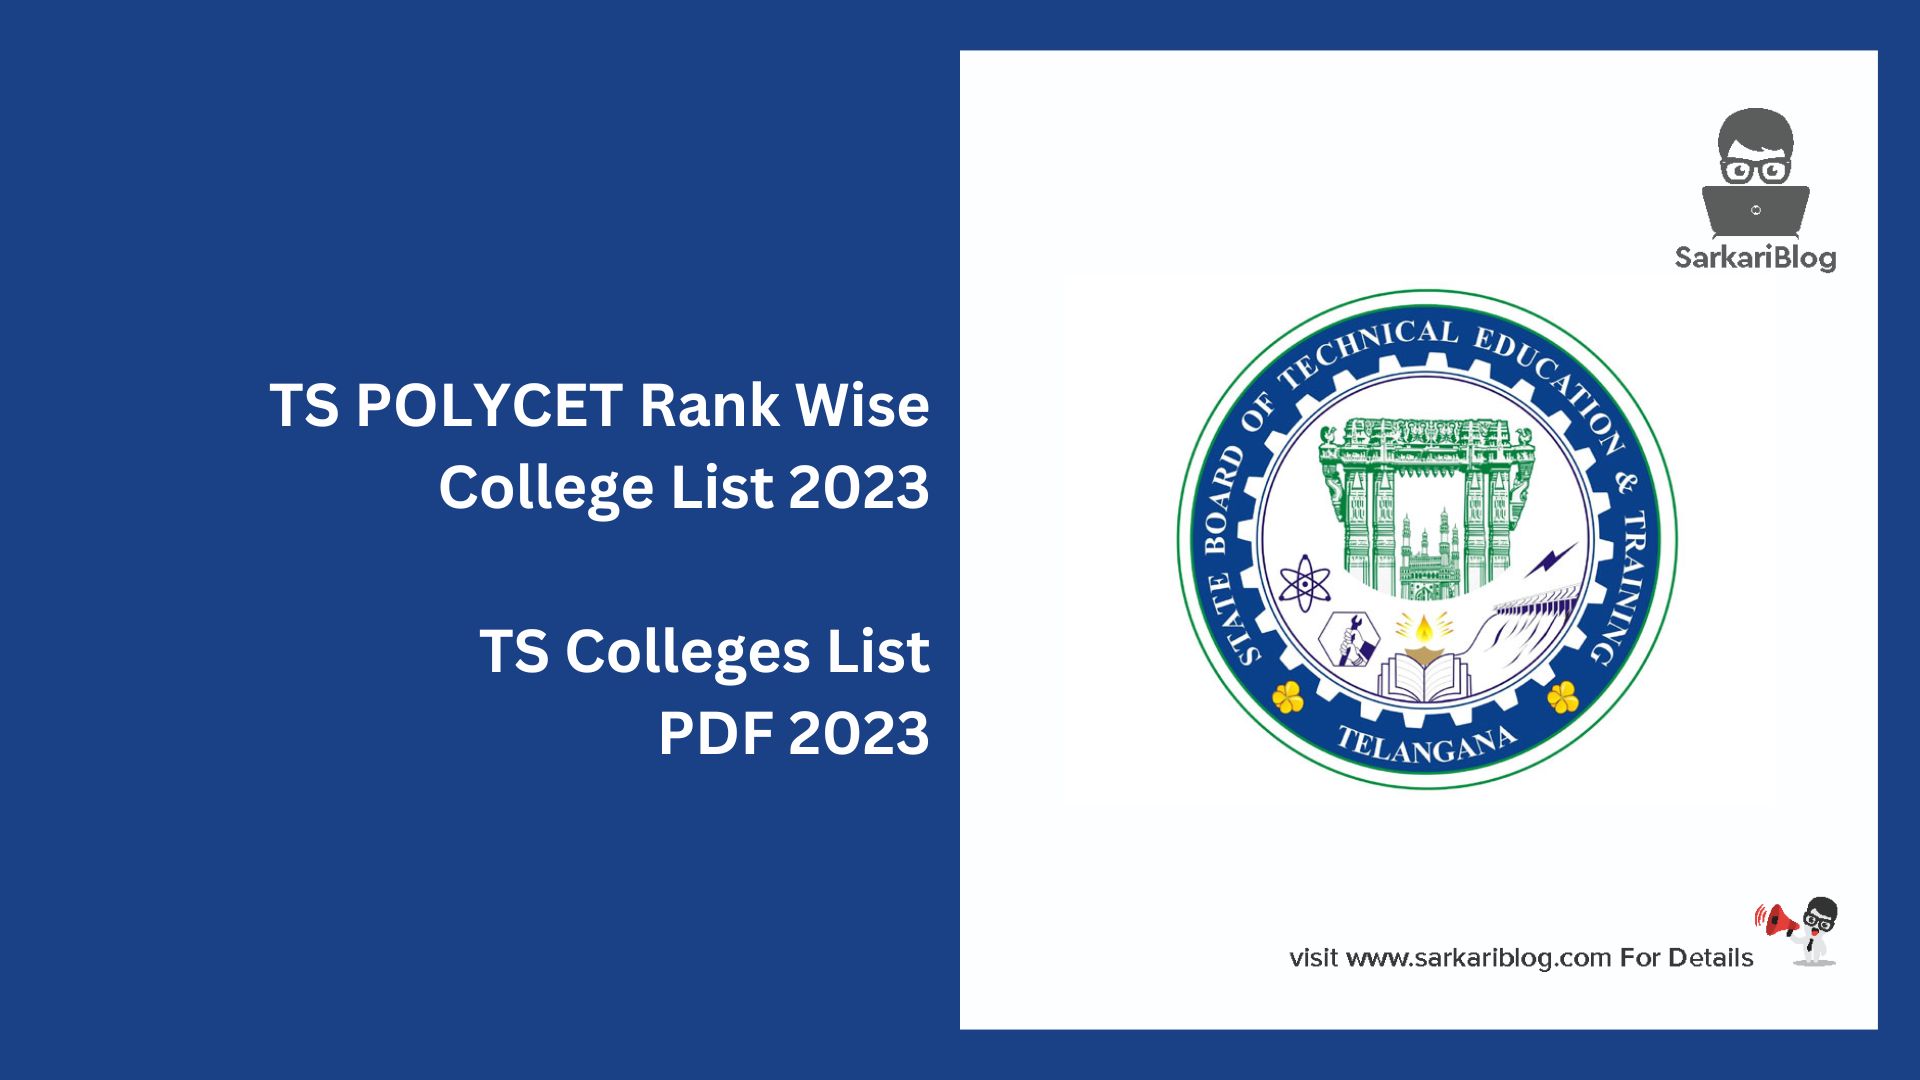 TS POLYCET Rank Wise College List 2023